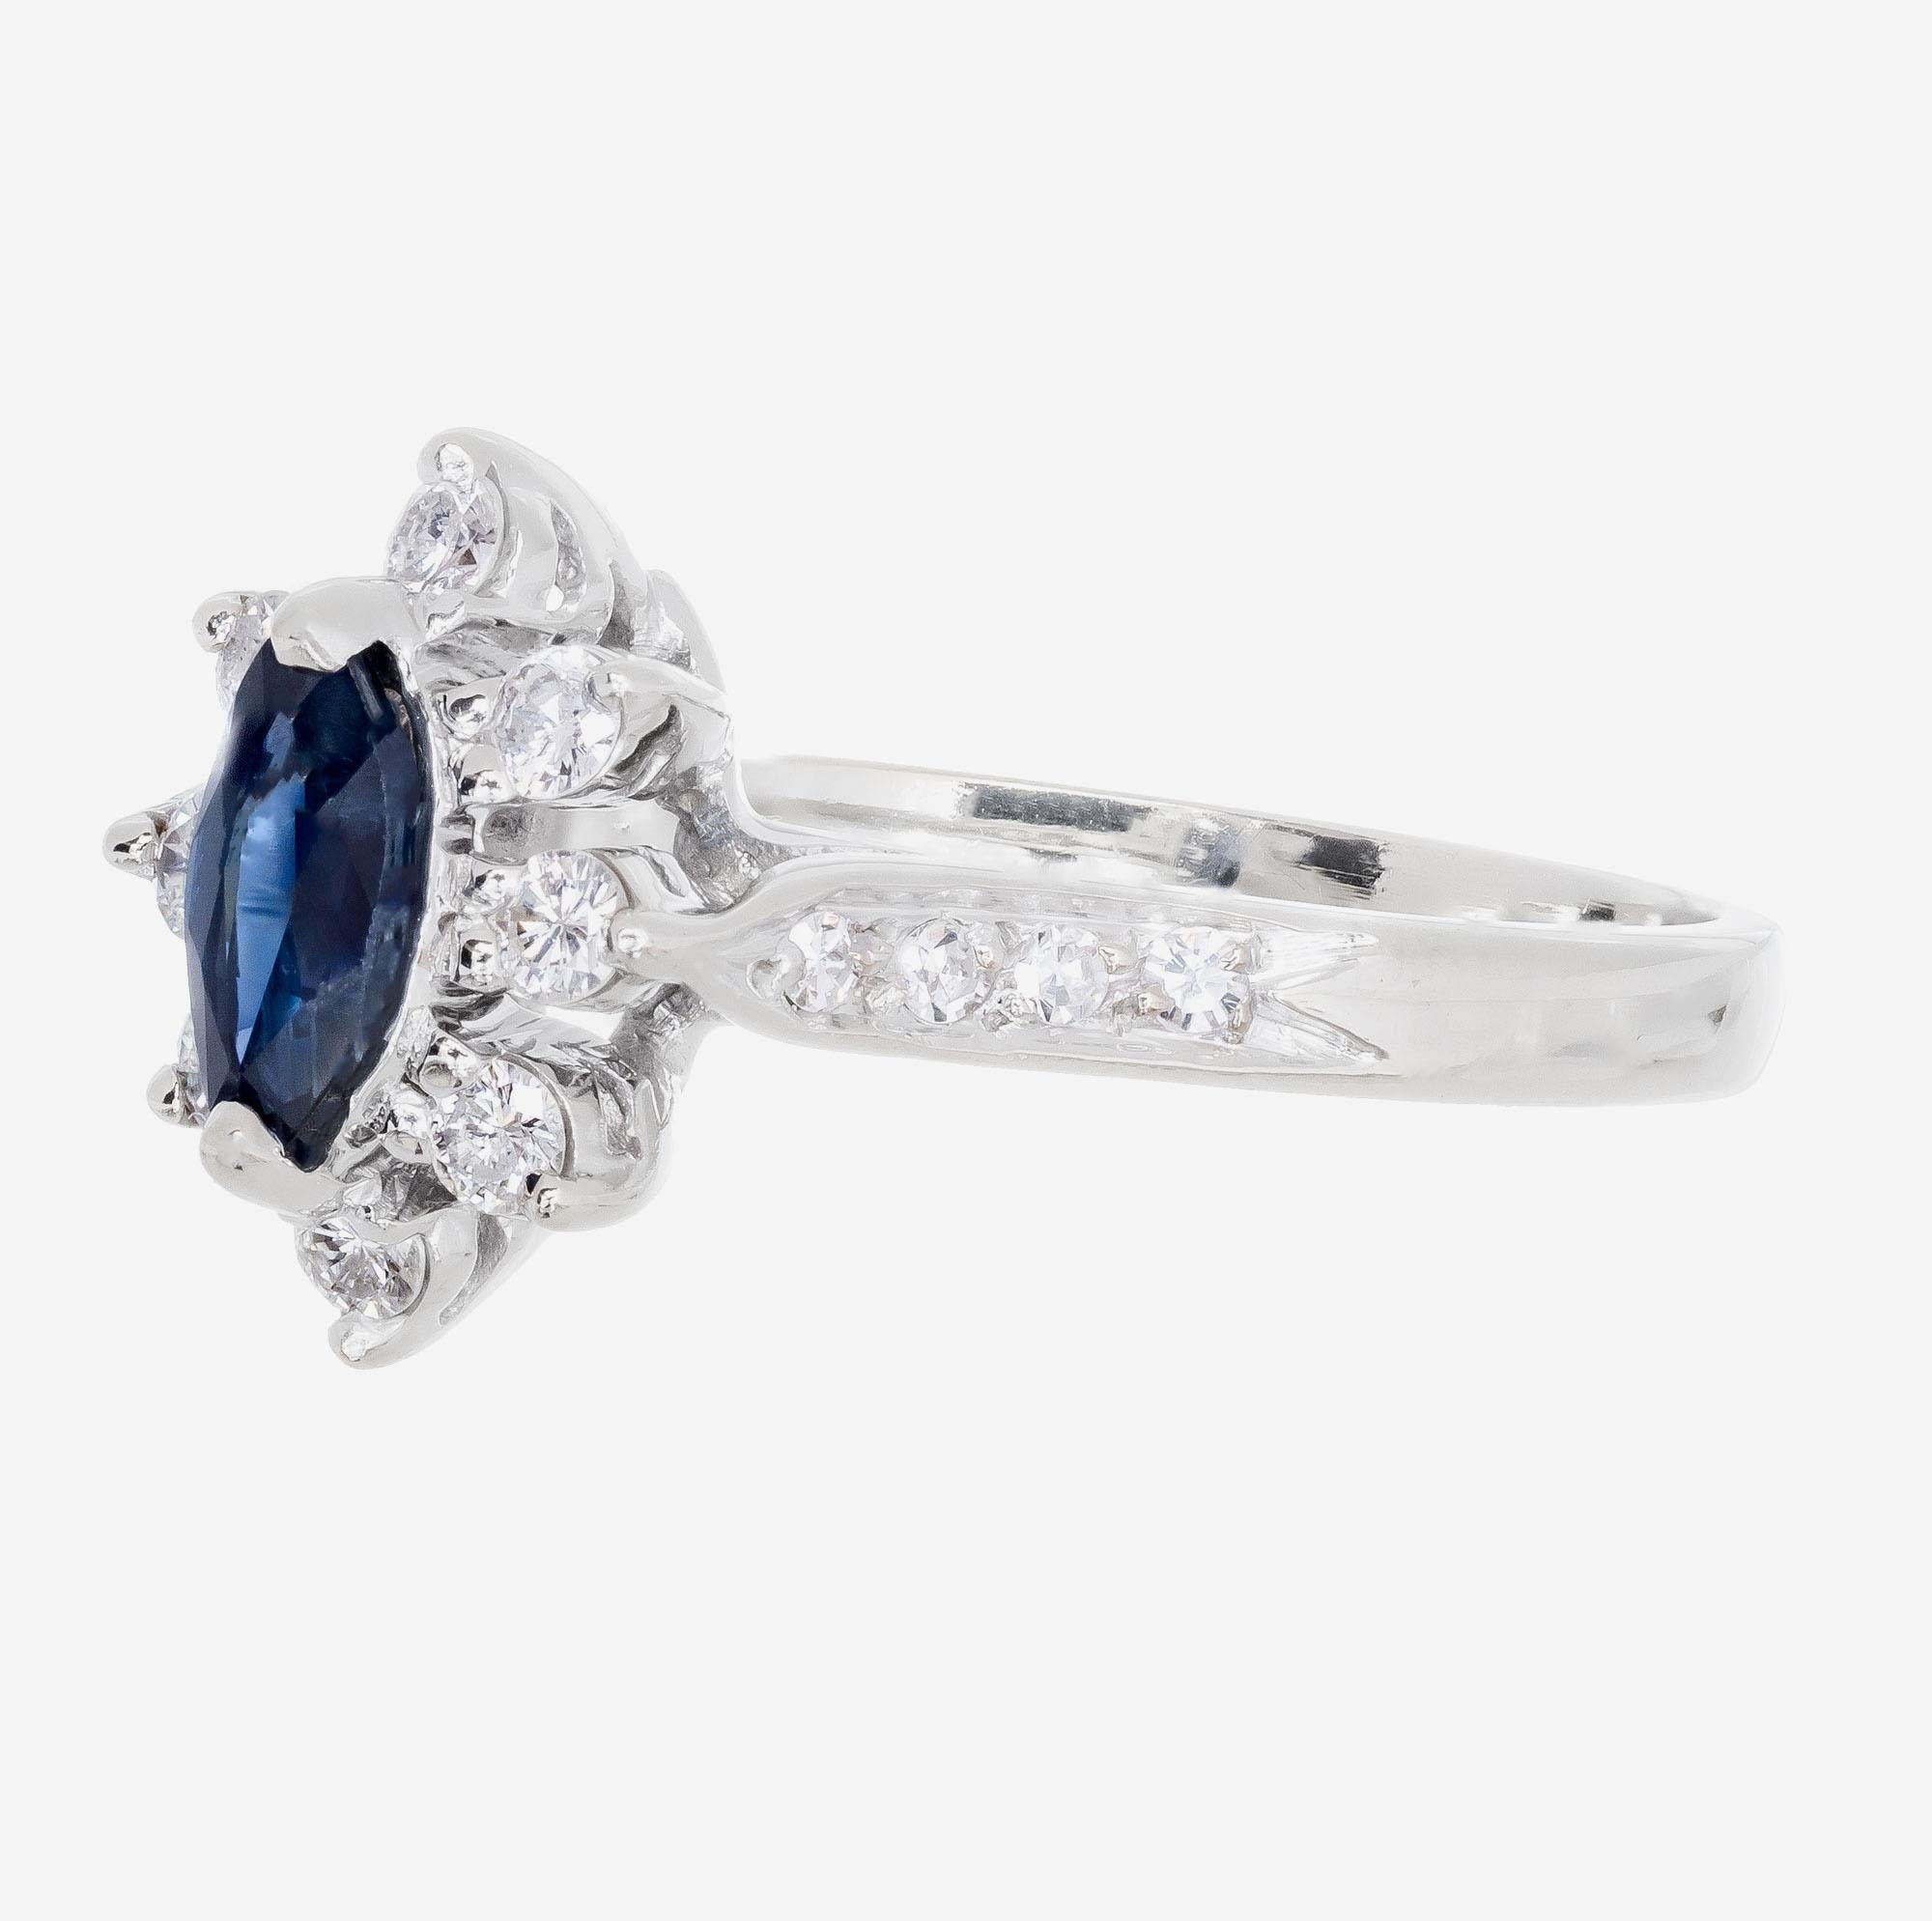 Diamond and sapphire engagement ring. Marquise center sapphire with a halo of round cut diamonds in a 14k white gold setting with round accent diamonds along the shank.    

8 round diamonds approx. total weight .24cts
8 round diamonds approx. total